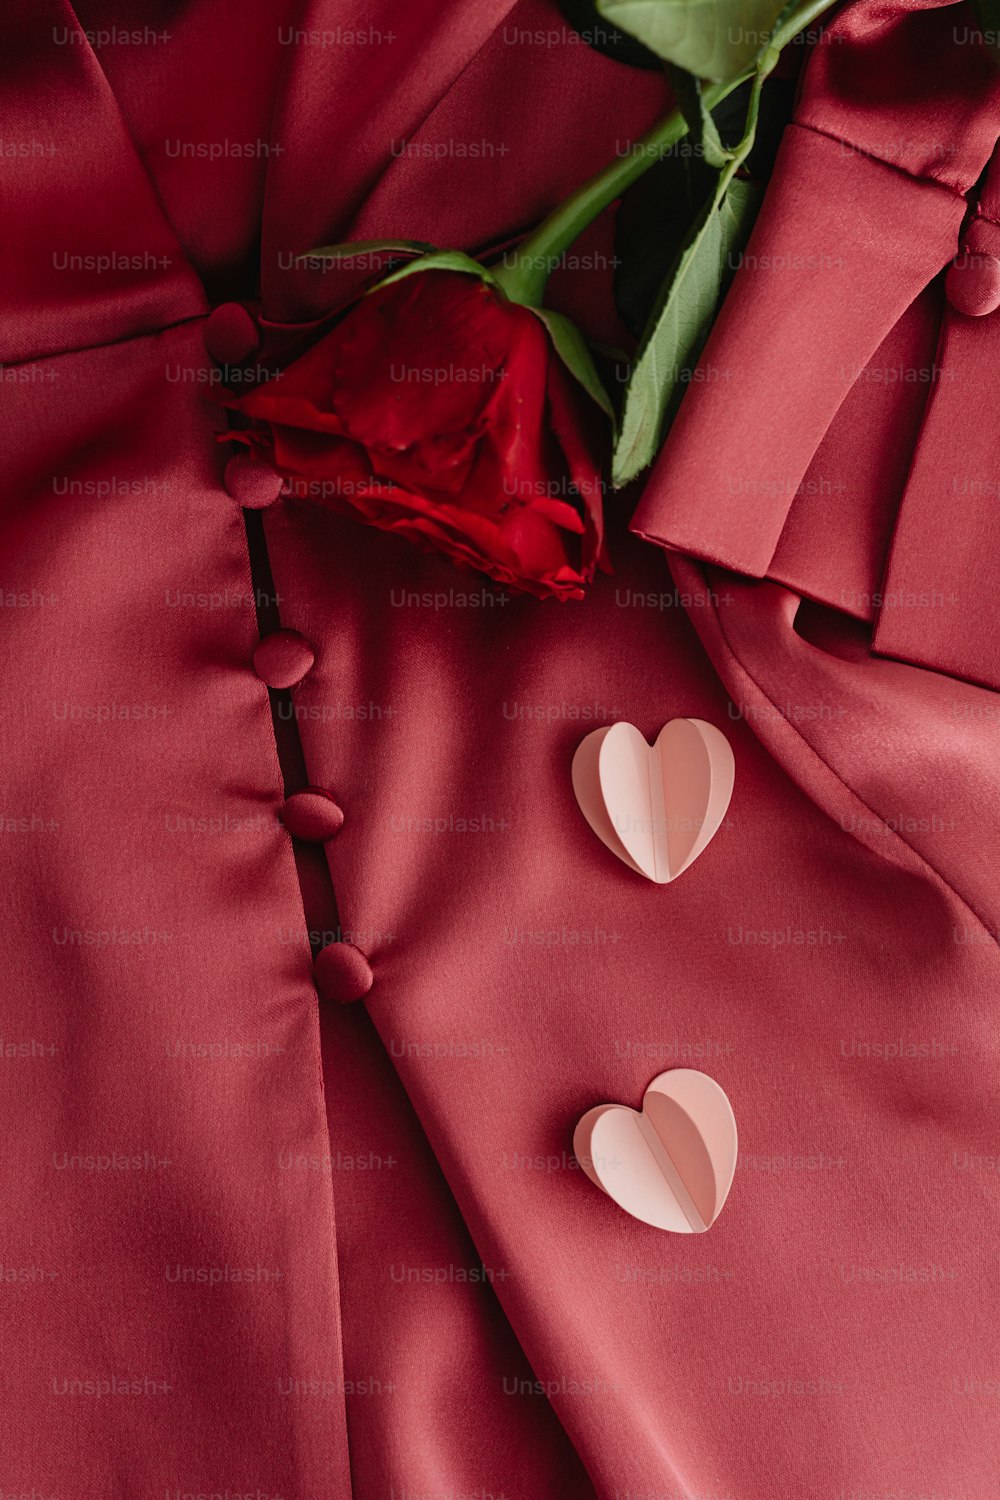 a rose and two hearts on a red satin